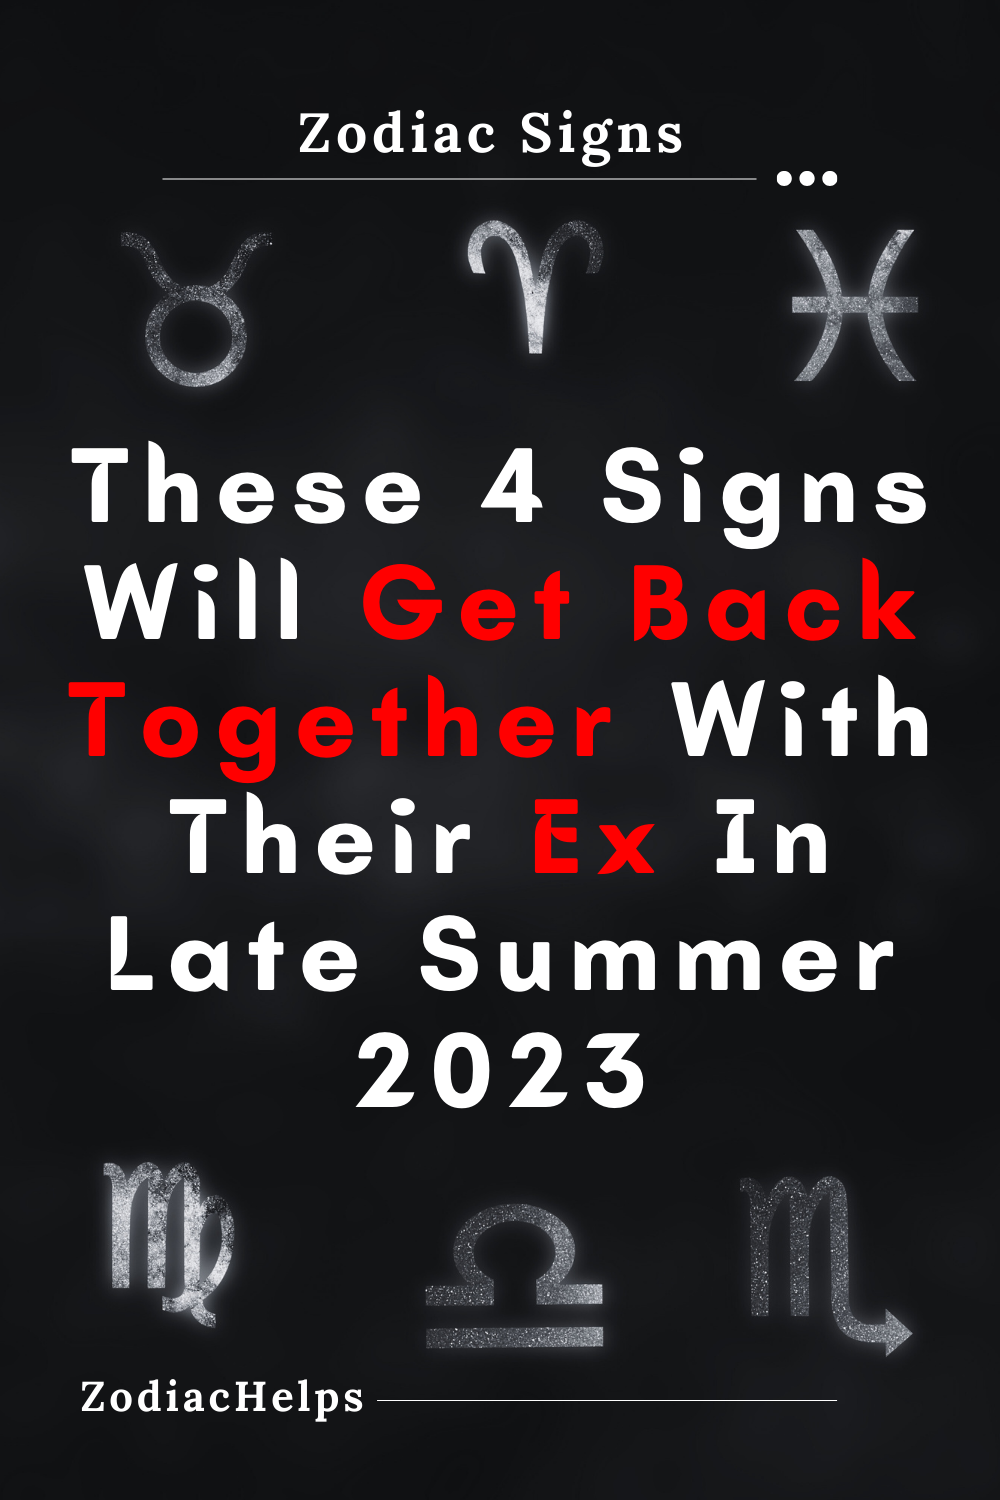 These 4 Signs Will Get Back Together With Their Ex In Late Summer 2023